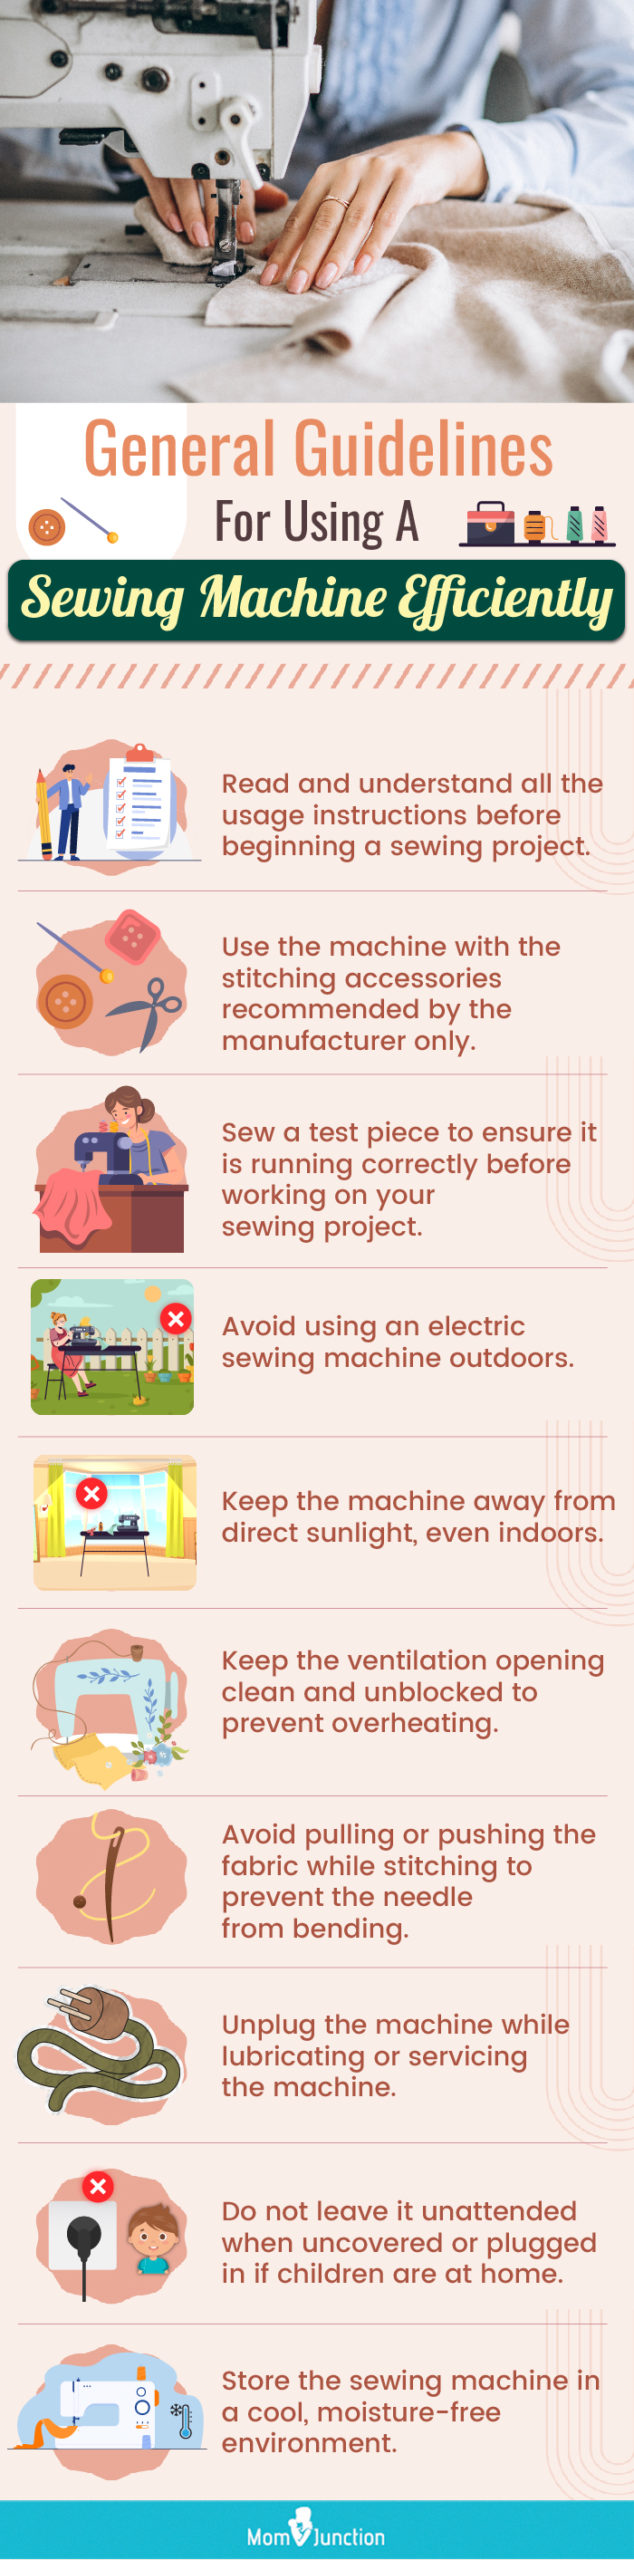 General Guidelines For Using A Sewing Machine Efficiently (infographic)